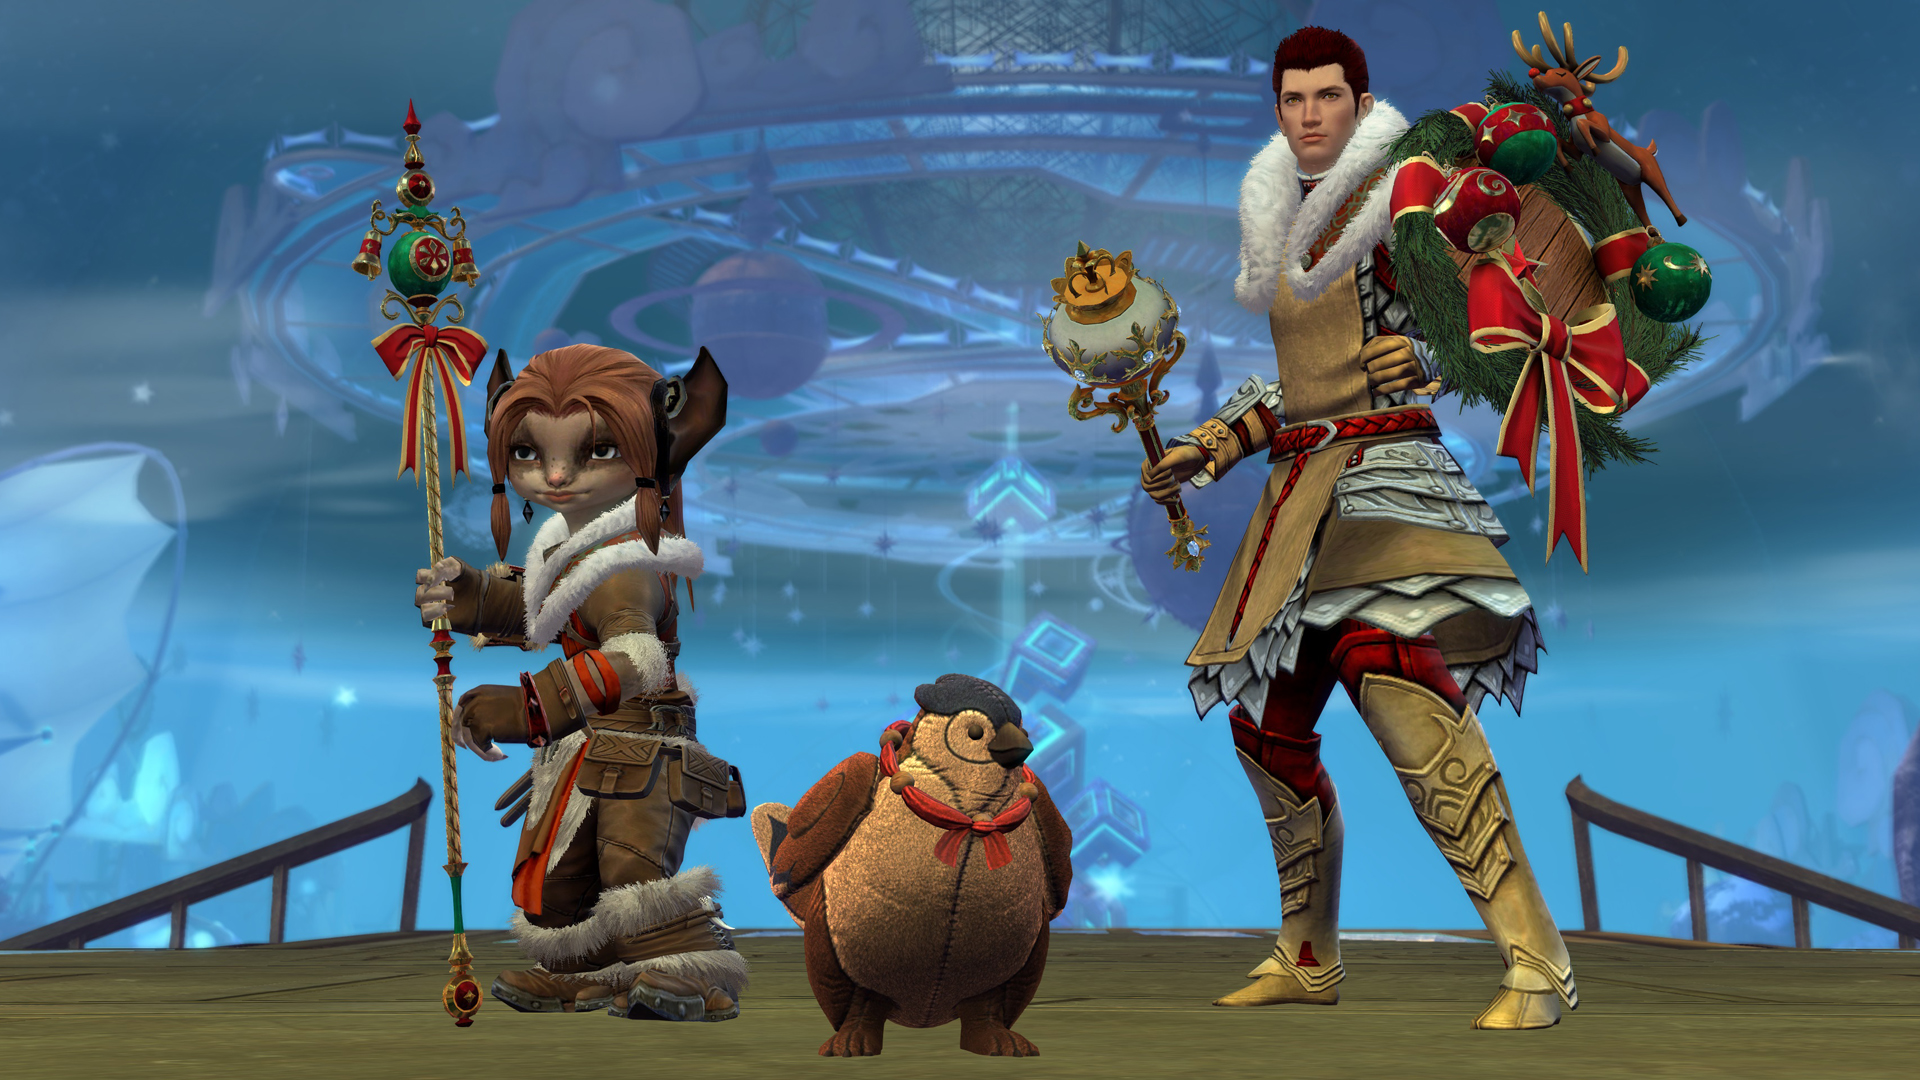 Guild Wars 2 Celebrates the Holiday Season with ‘A Very Merry Wintersday 2023’